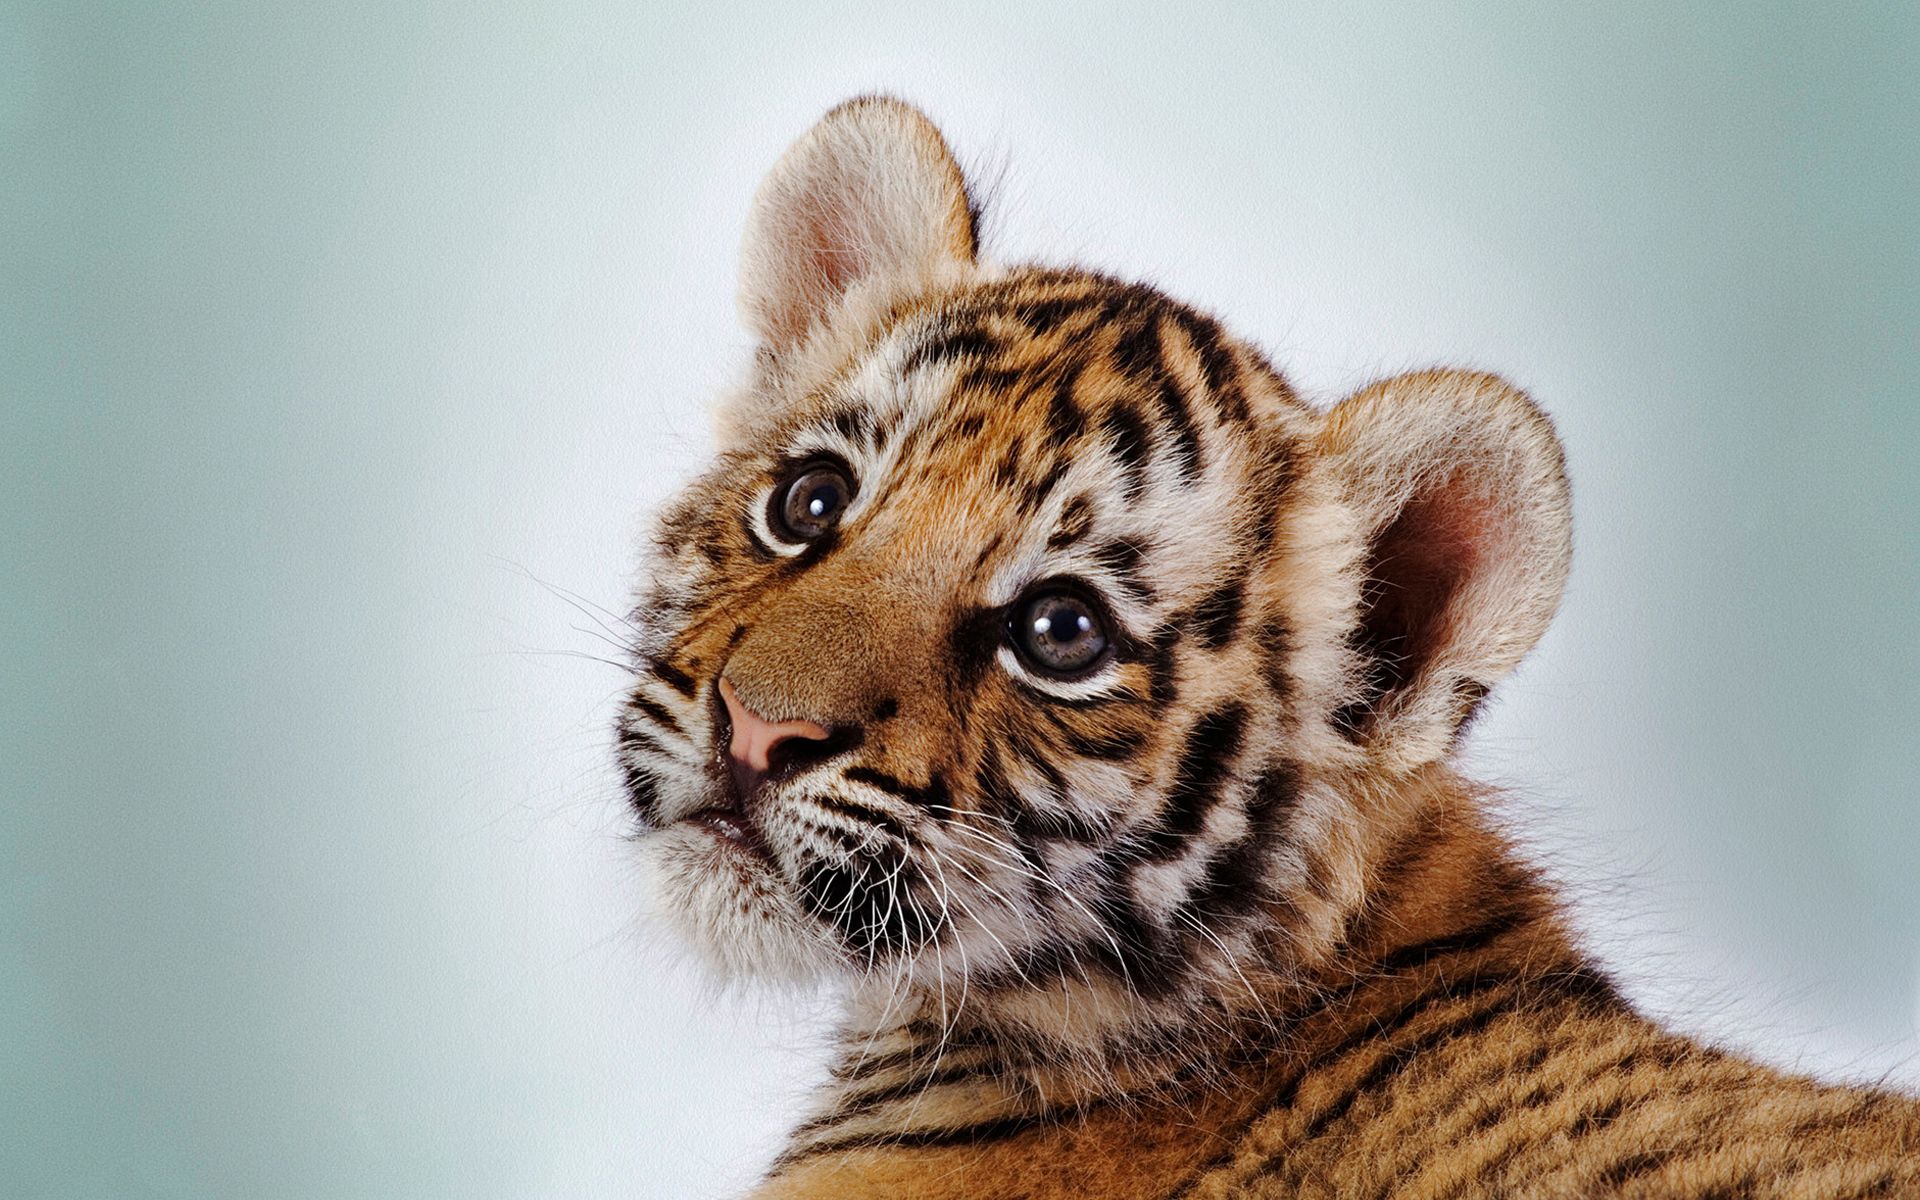 tiger, tiger cub, animals, young, muzzle, striped, kid, tot, joey